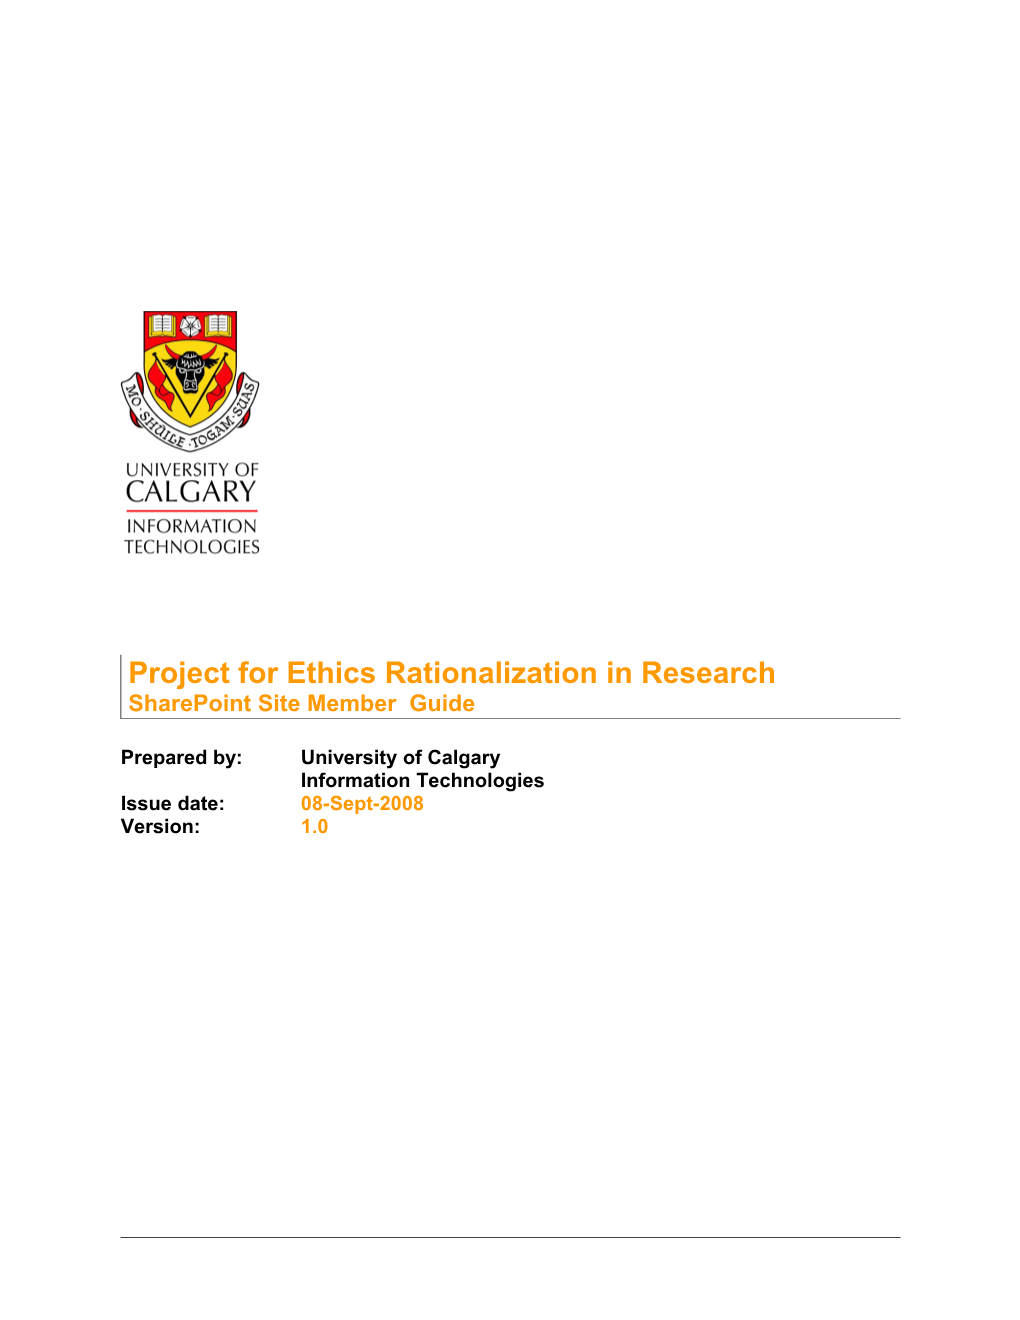 Project for Ethics Rationalization in Research